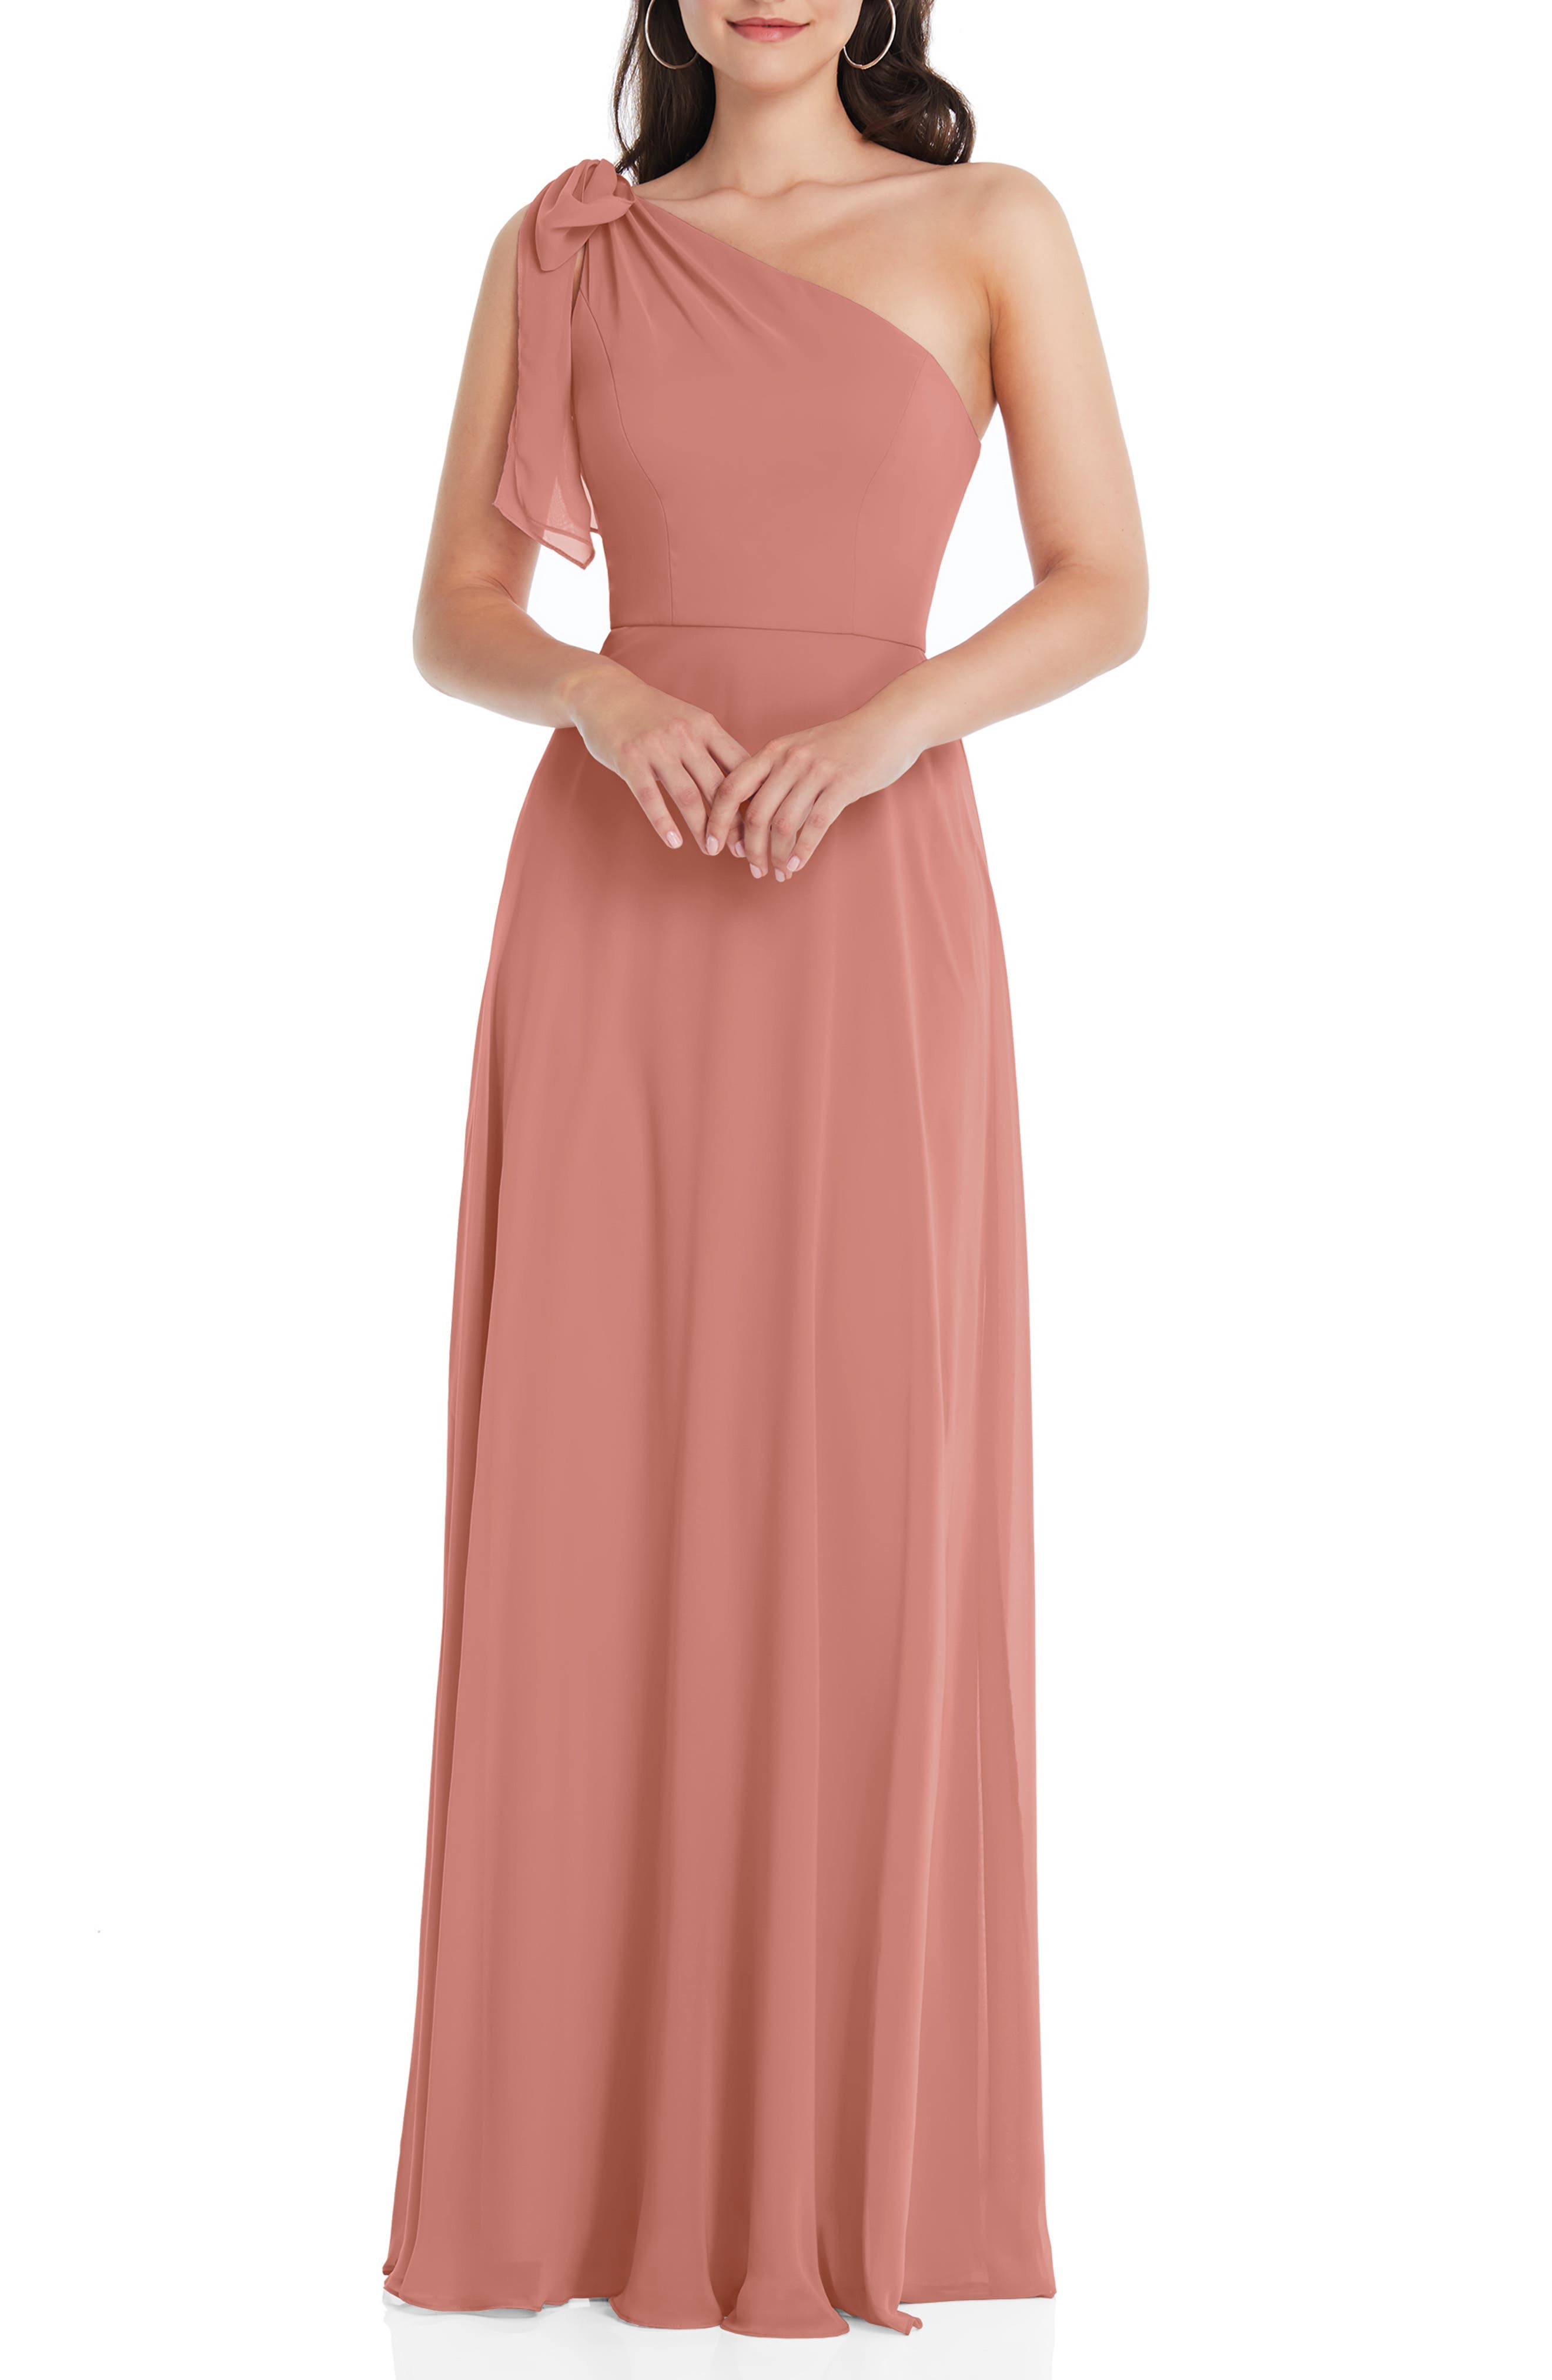 Pink Formal Dresses ☀ Evening Gowns ...